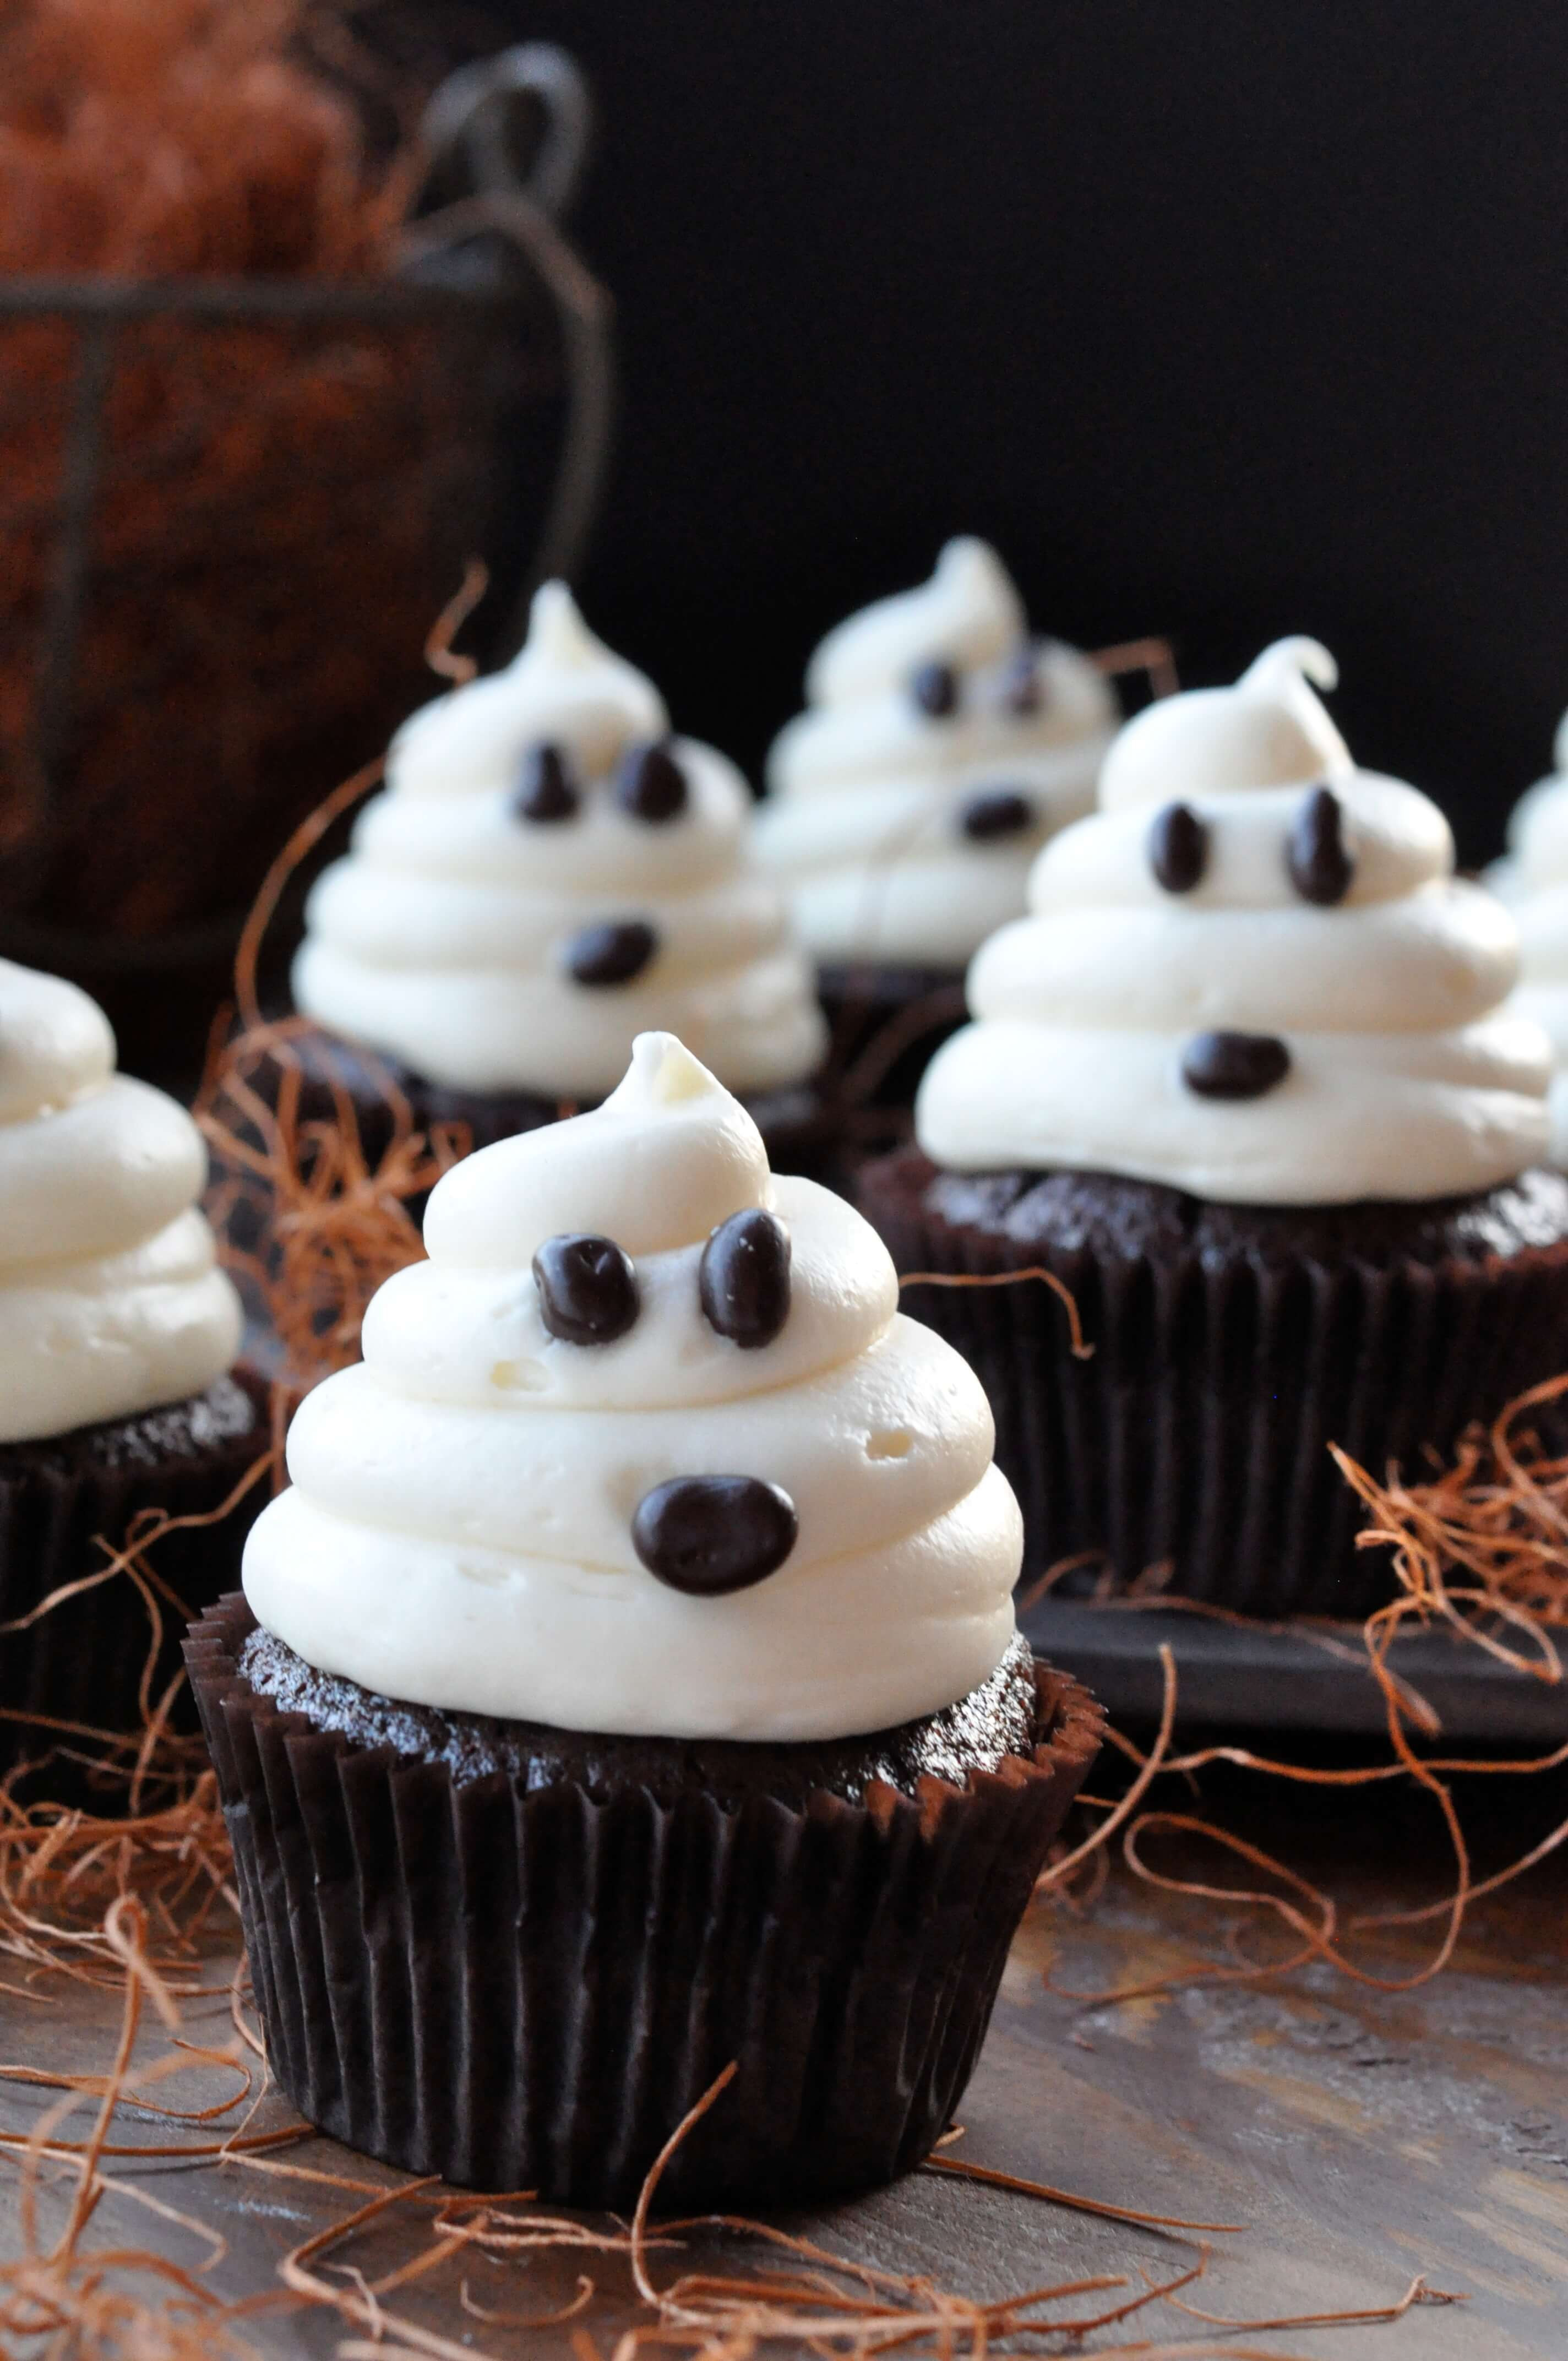 Cupcakes De Halloween
 Halloween Ghosts on Carrot Cake Recipe—Fast and Easy